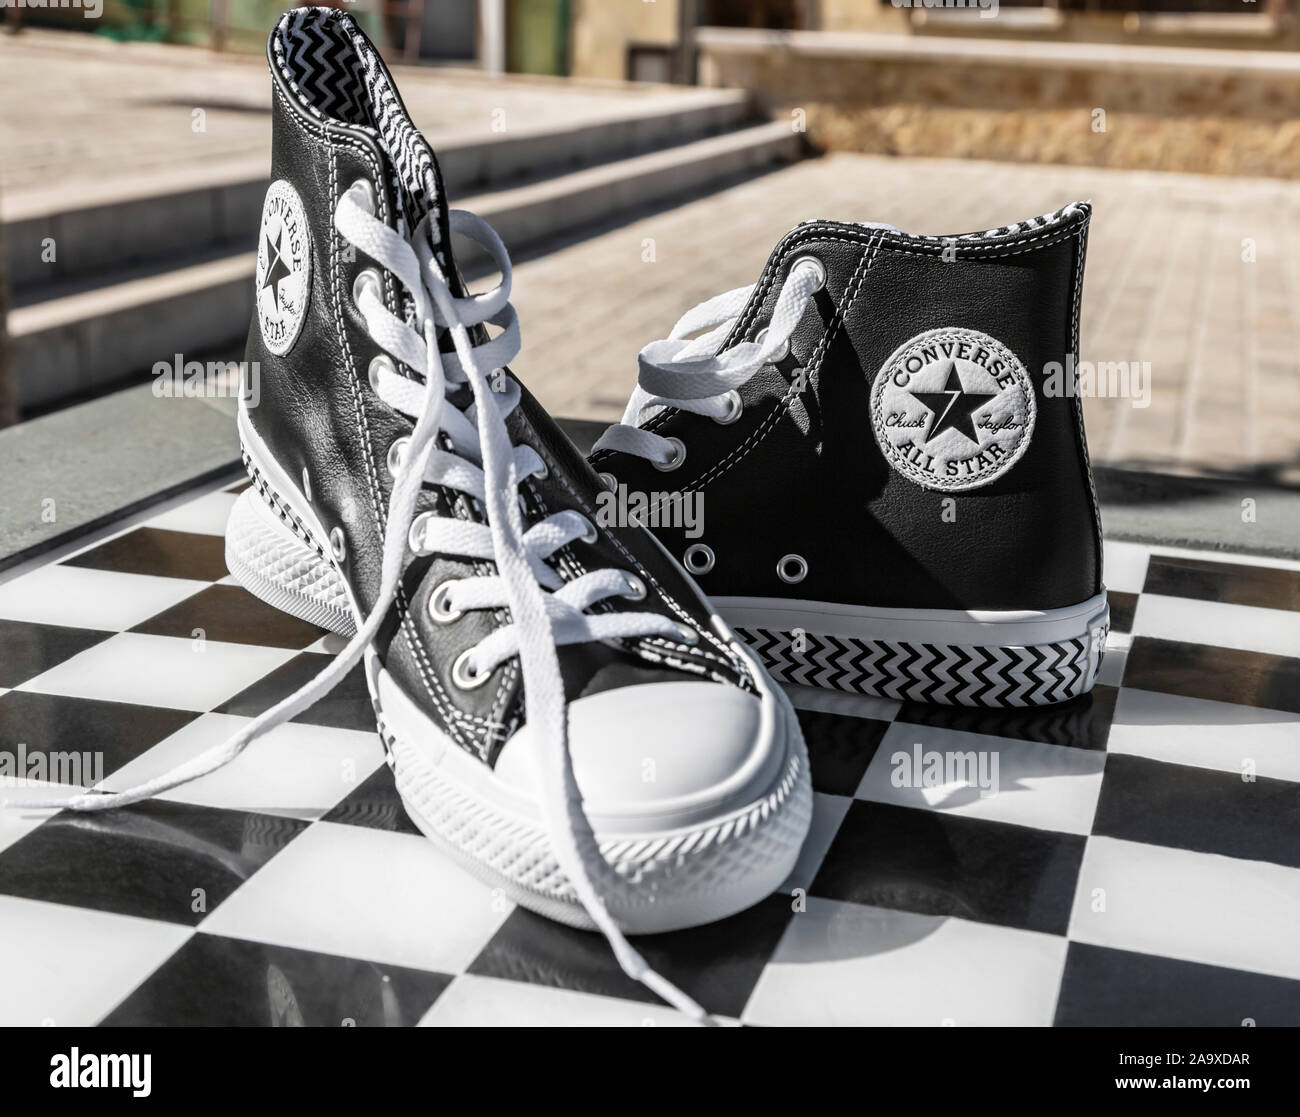 haak schreeuw Winderig Chartres, France - Spetember 2, 2019: Image of a pair of All Star Converse  sneakers on a cobblestone street Stock Photo - Alamy